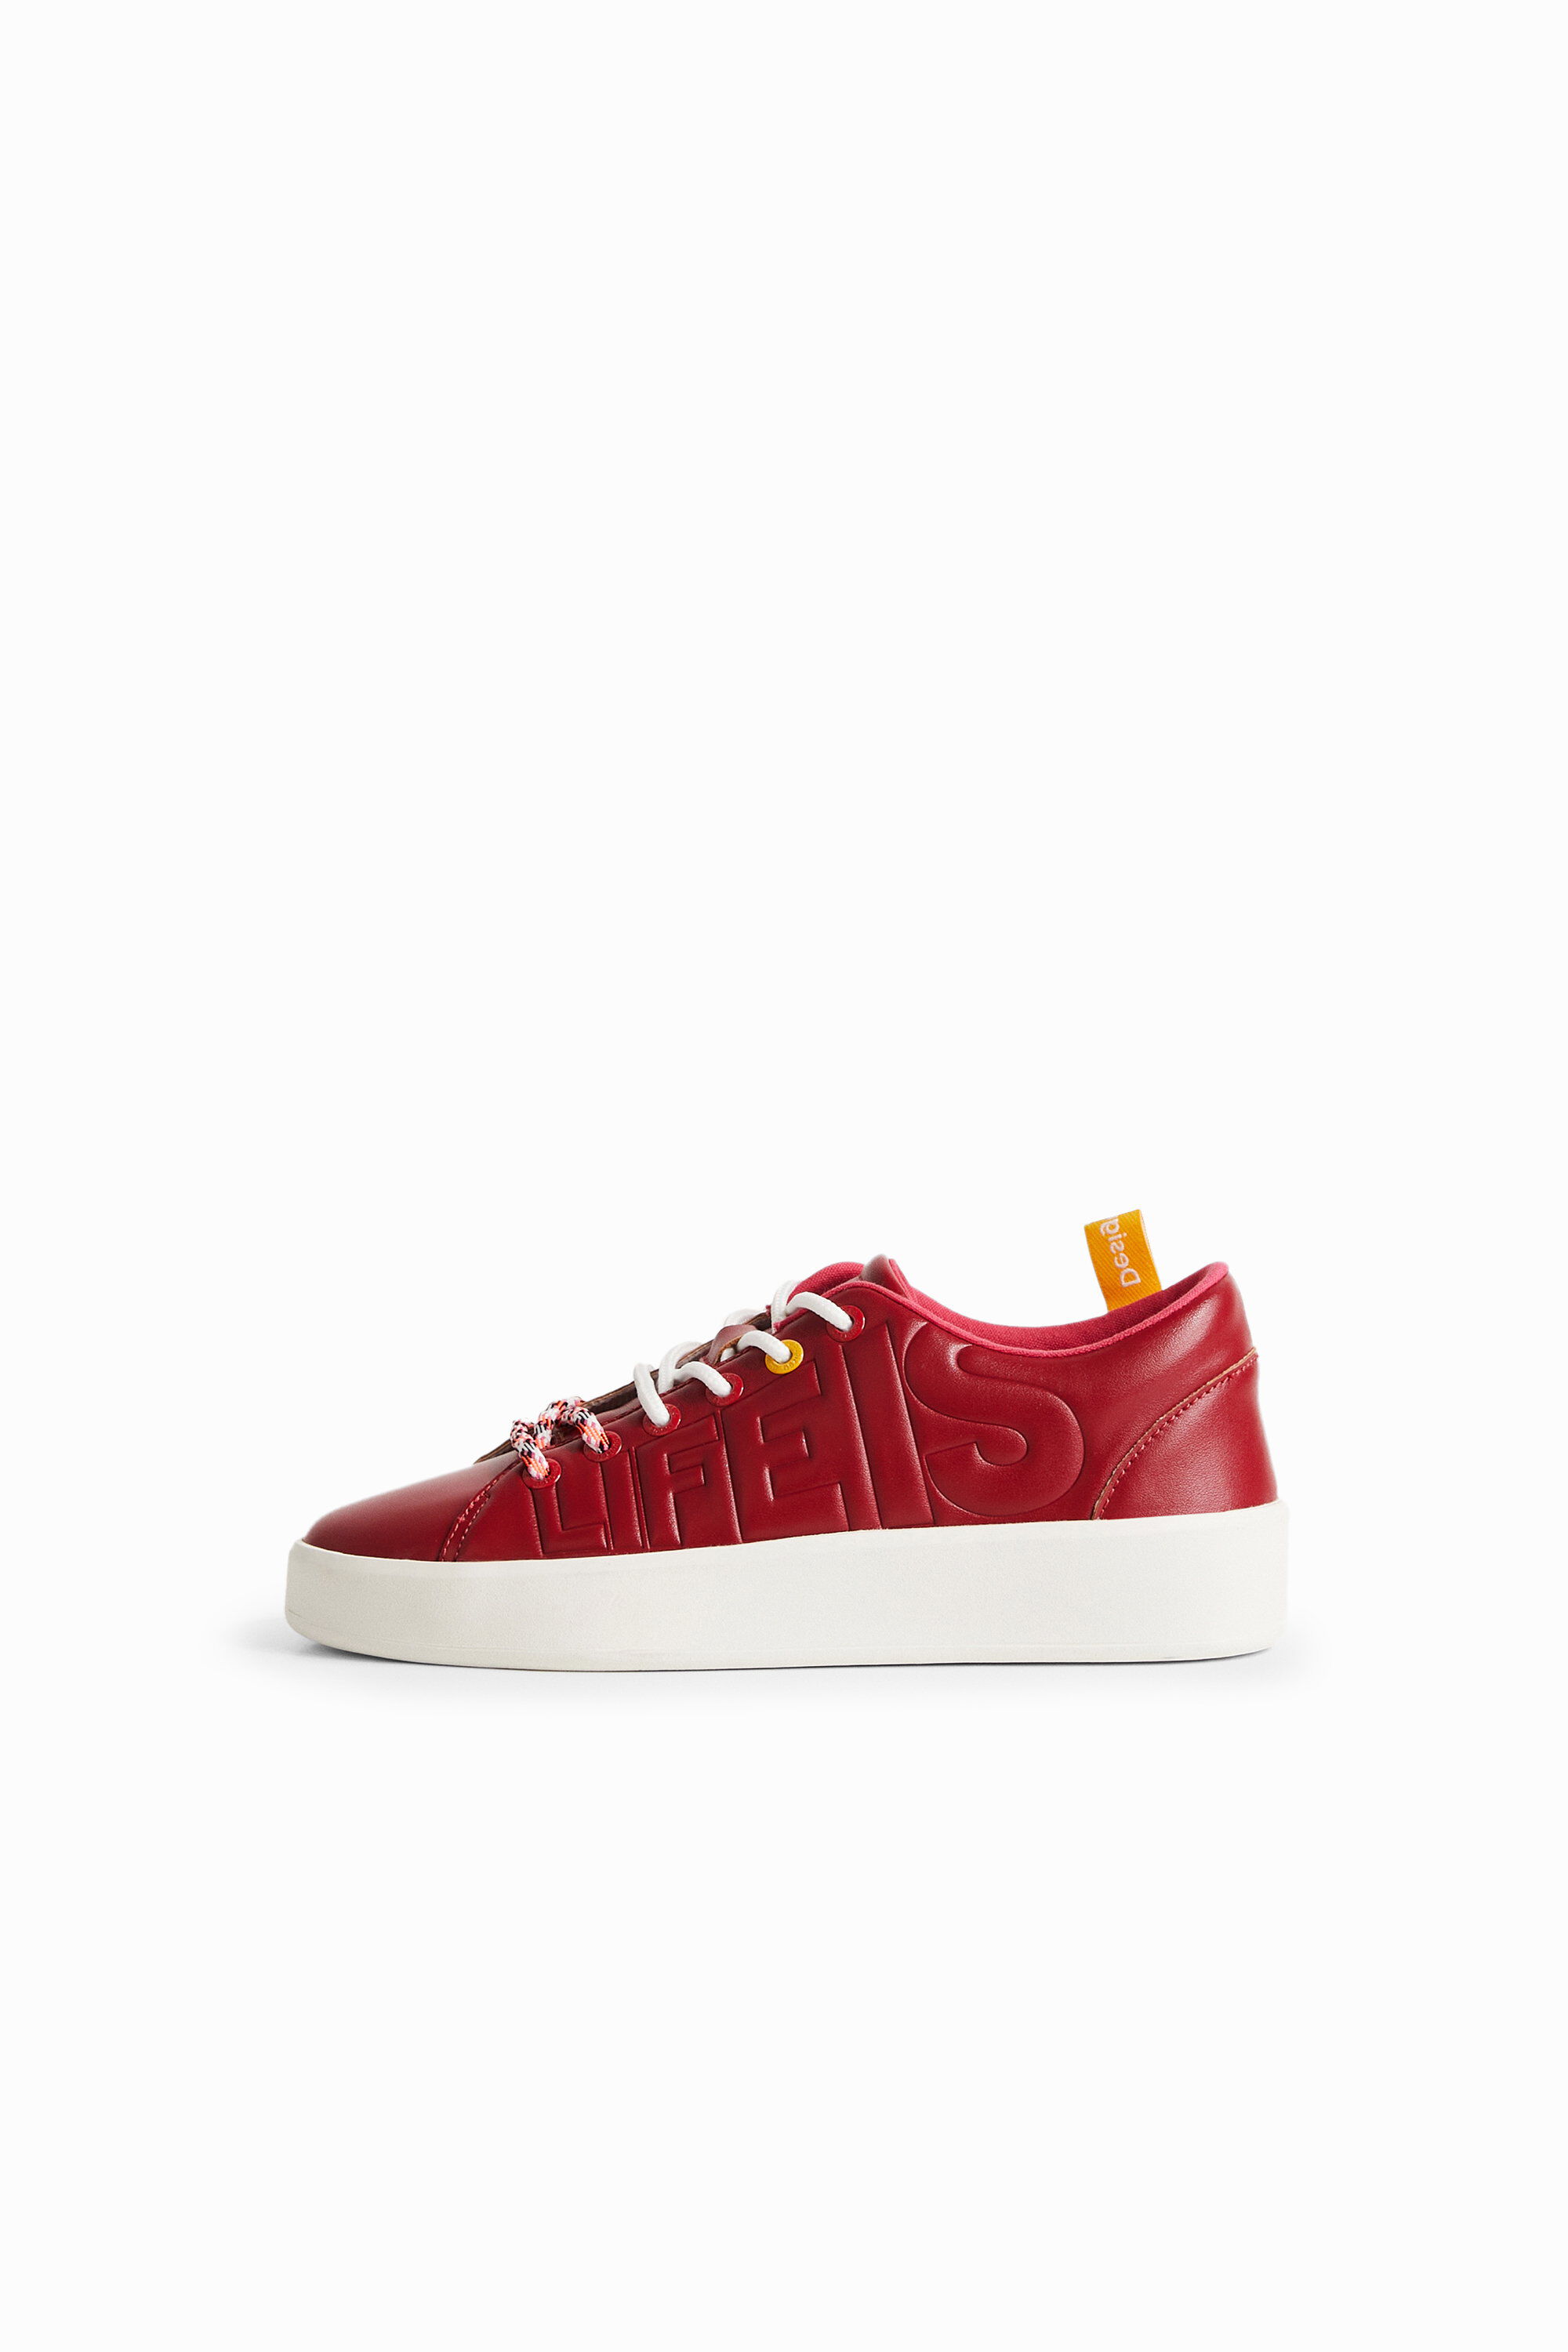 Desigual Life Is Awesome Sneakers In Red